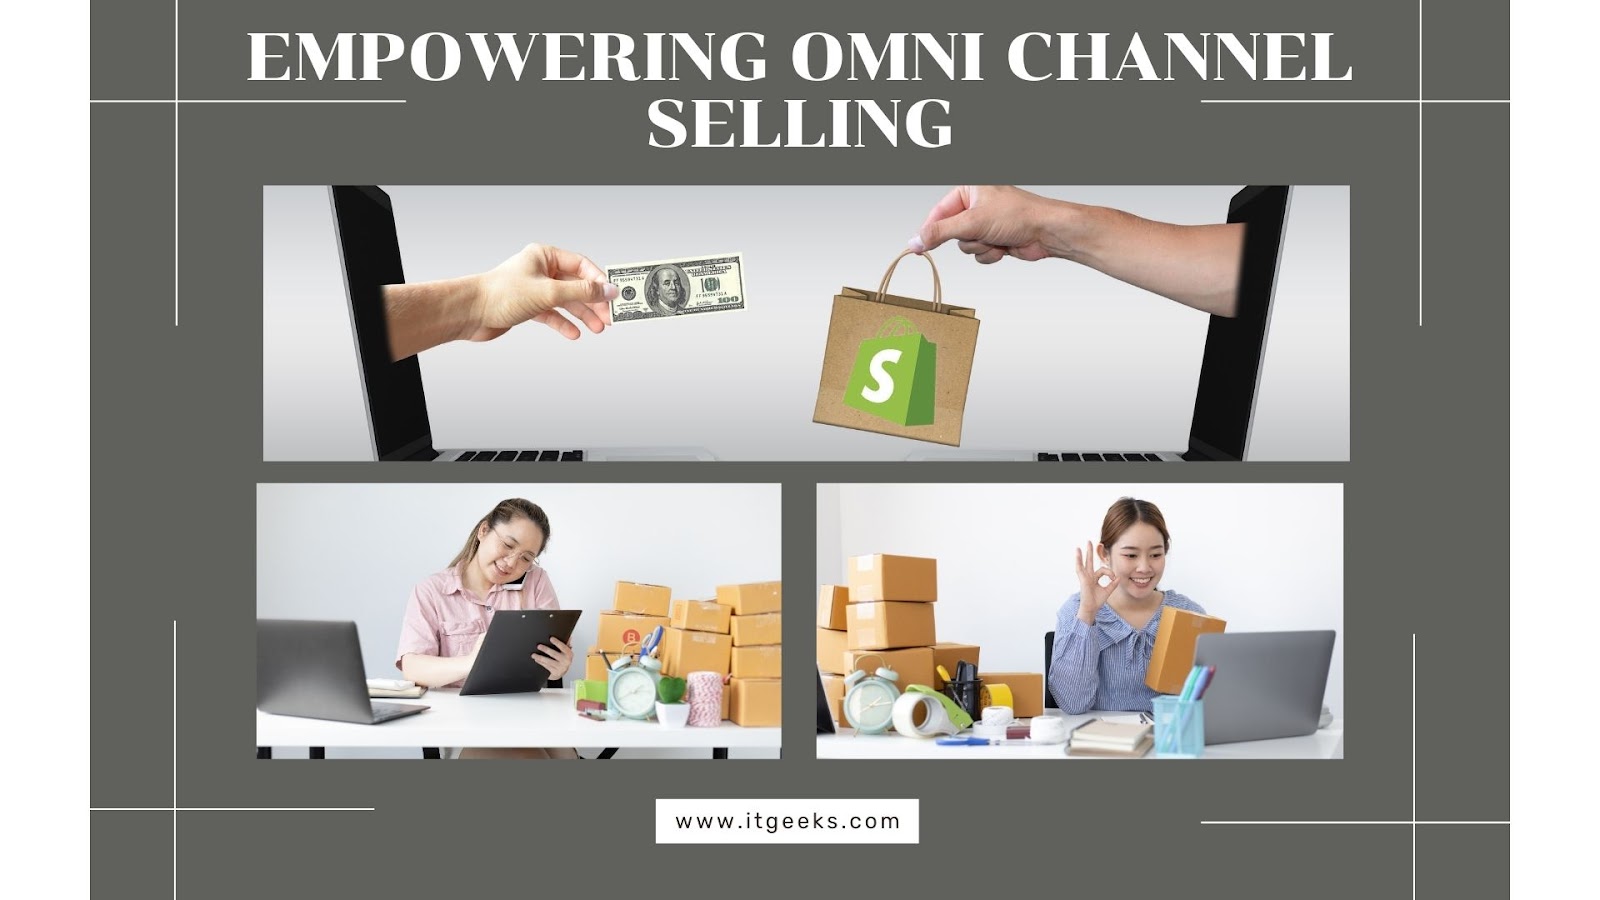 Empowering Omni Channel Selling